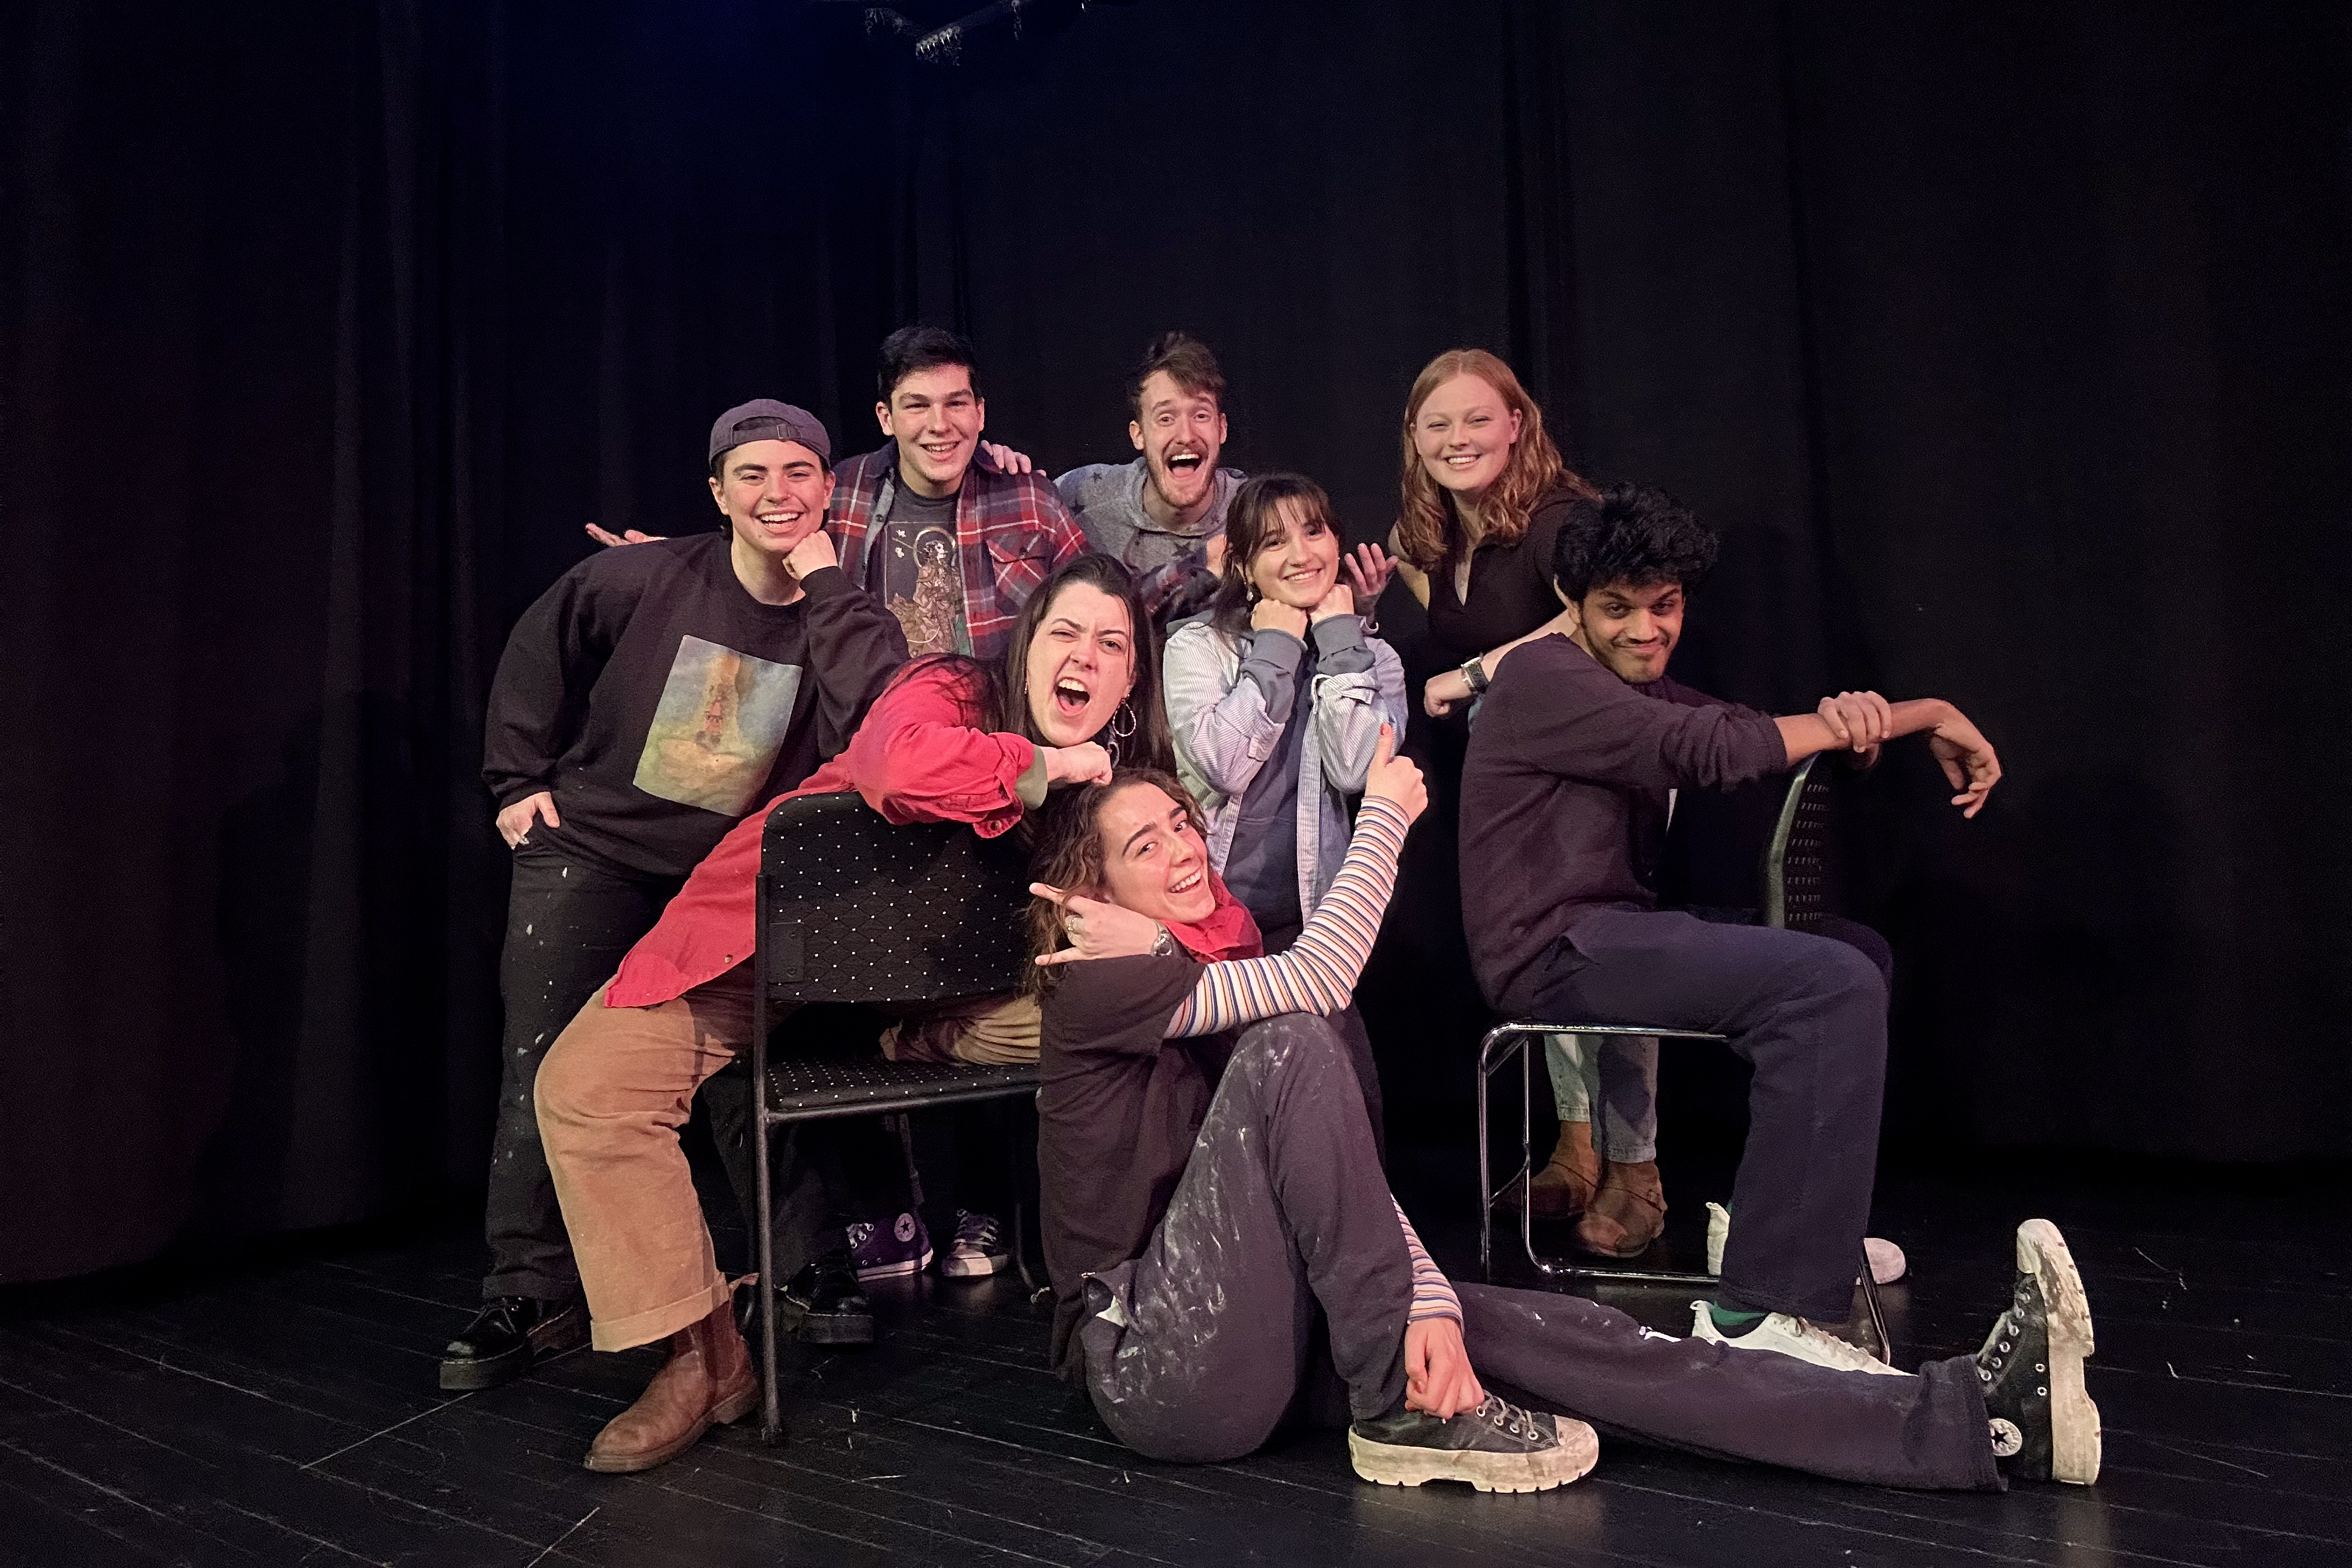 Elise Milner ’25, seated on the floor, is a member of Skidomedy, one of several ¼ϲʿ student clubs dedicated to comedy.